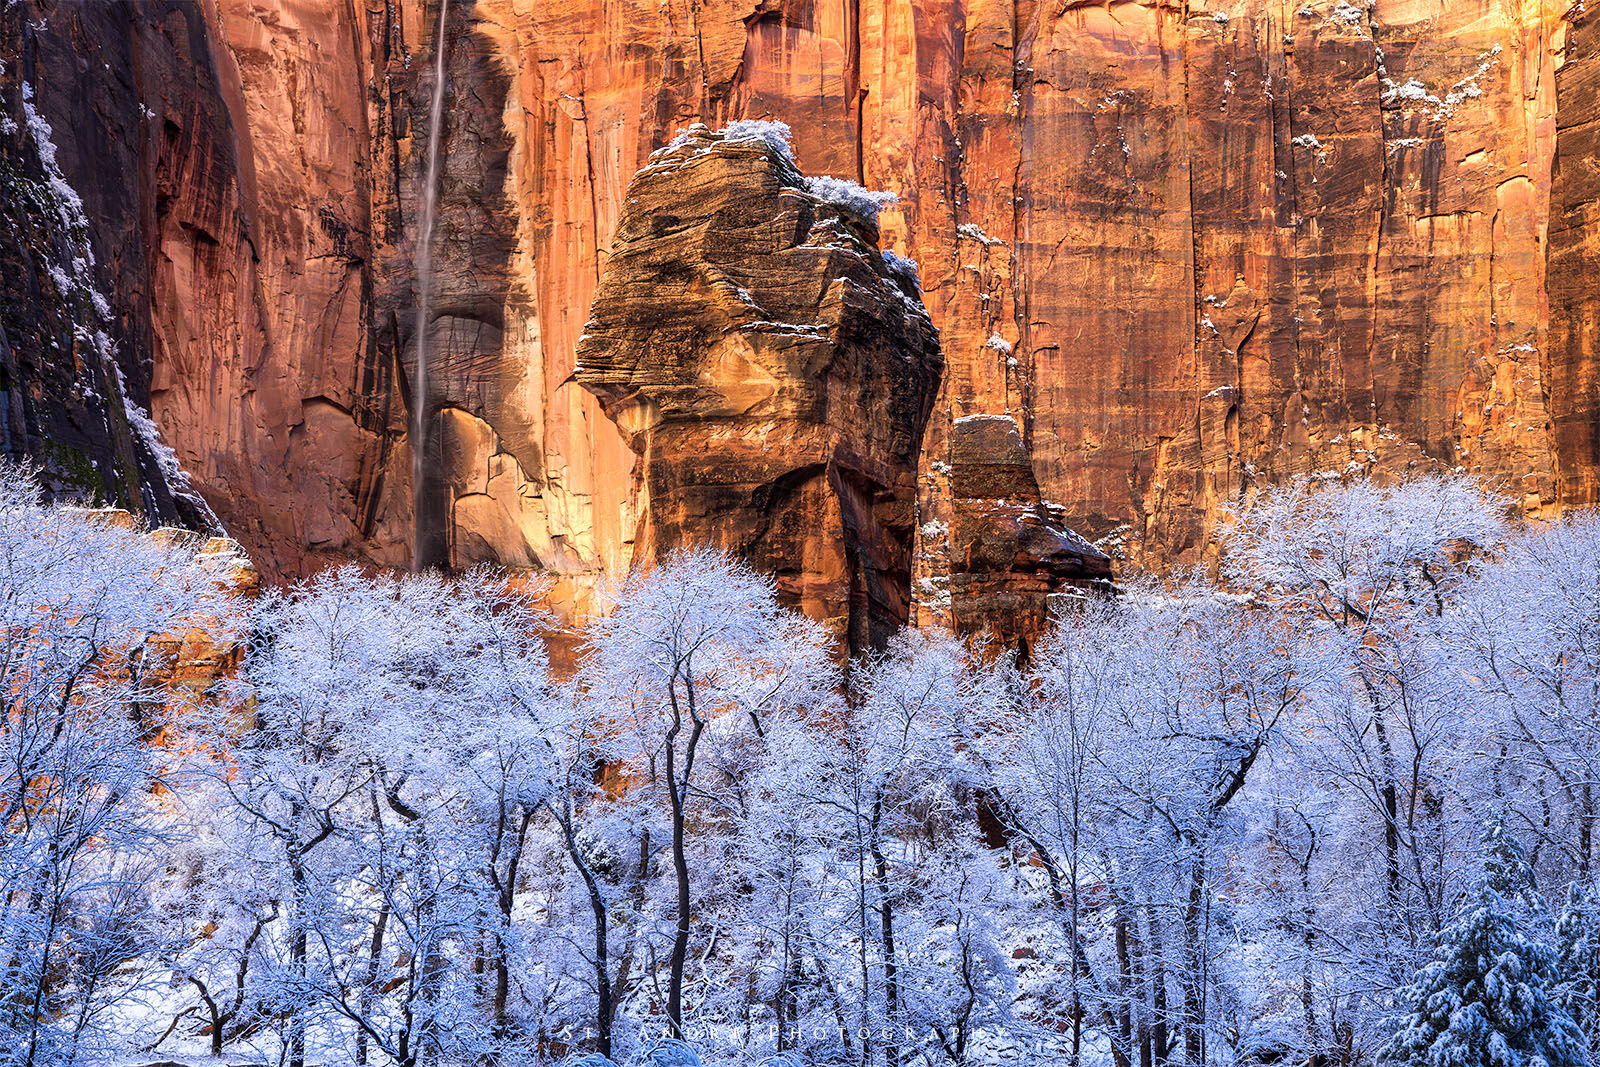 The temple of sinawava in Zion National Park. The cottonwood trees are covered in snow and the waterfall is going in the background. 